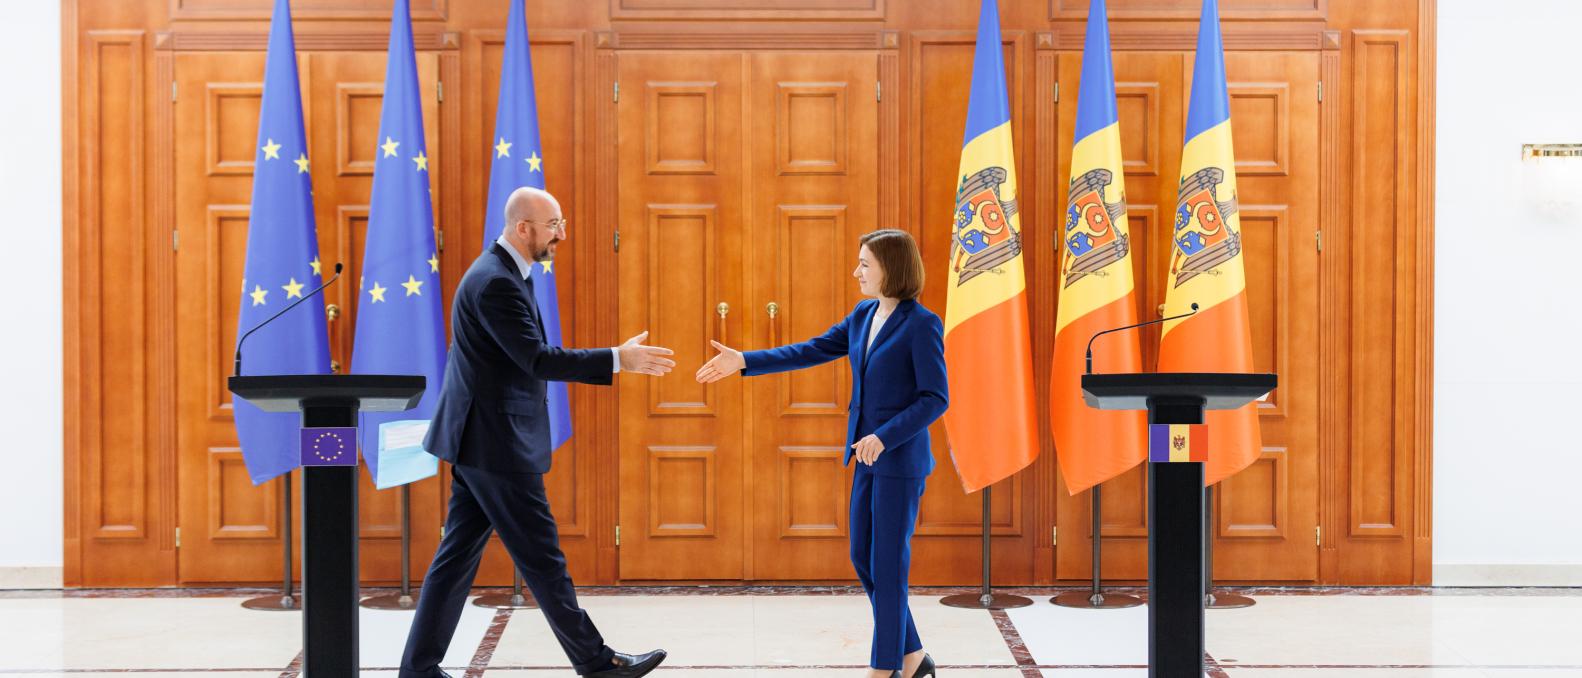 President of the European Council and President of the Republic of Moldova